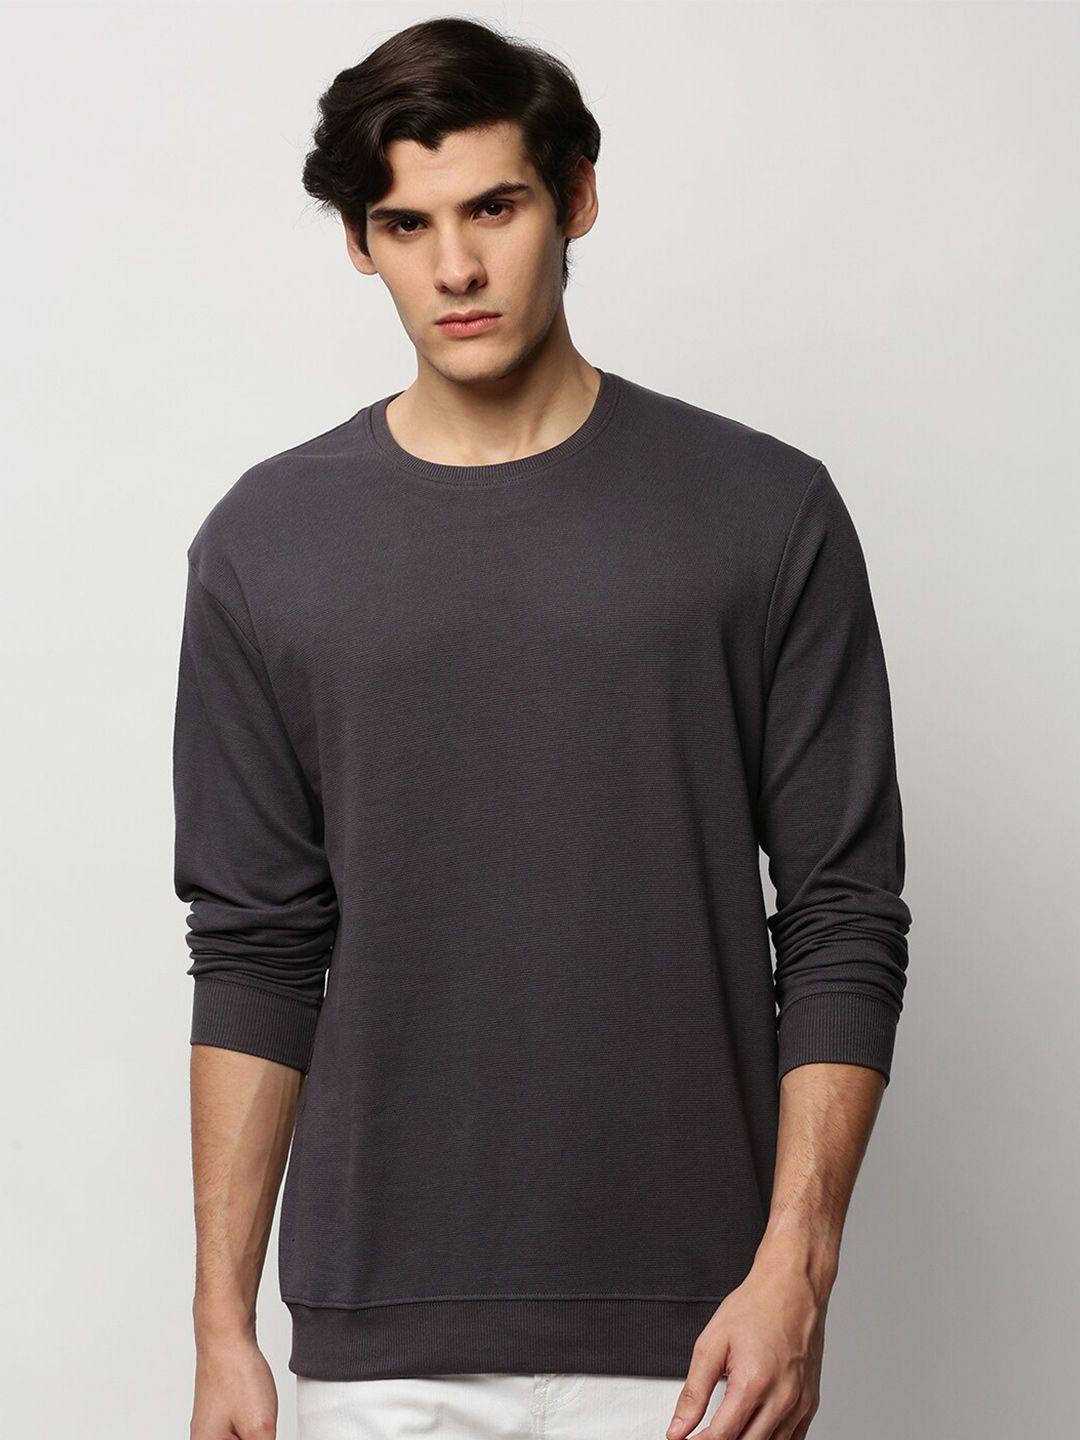 showoff round neck long sleeves cotton pullover